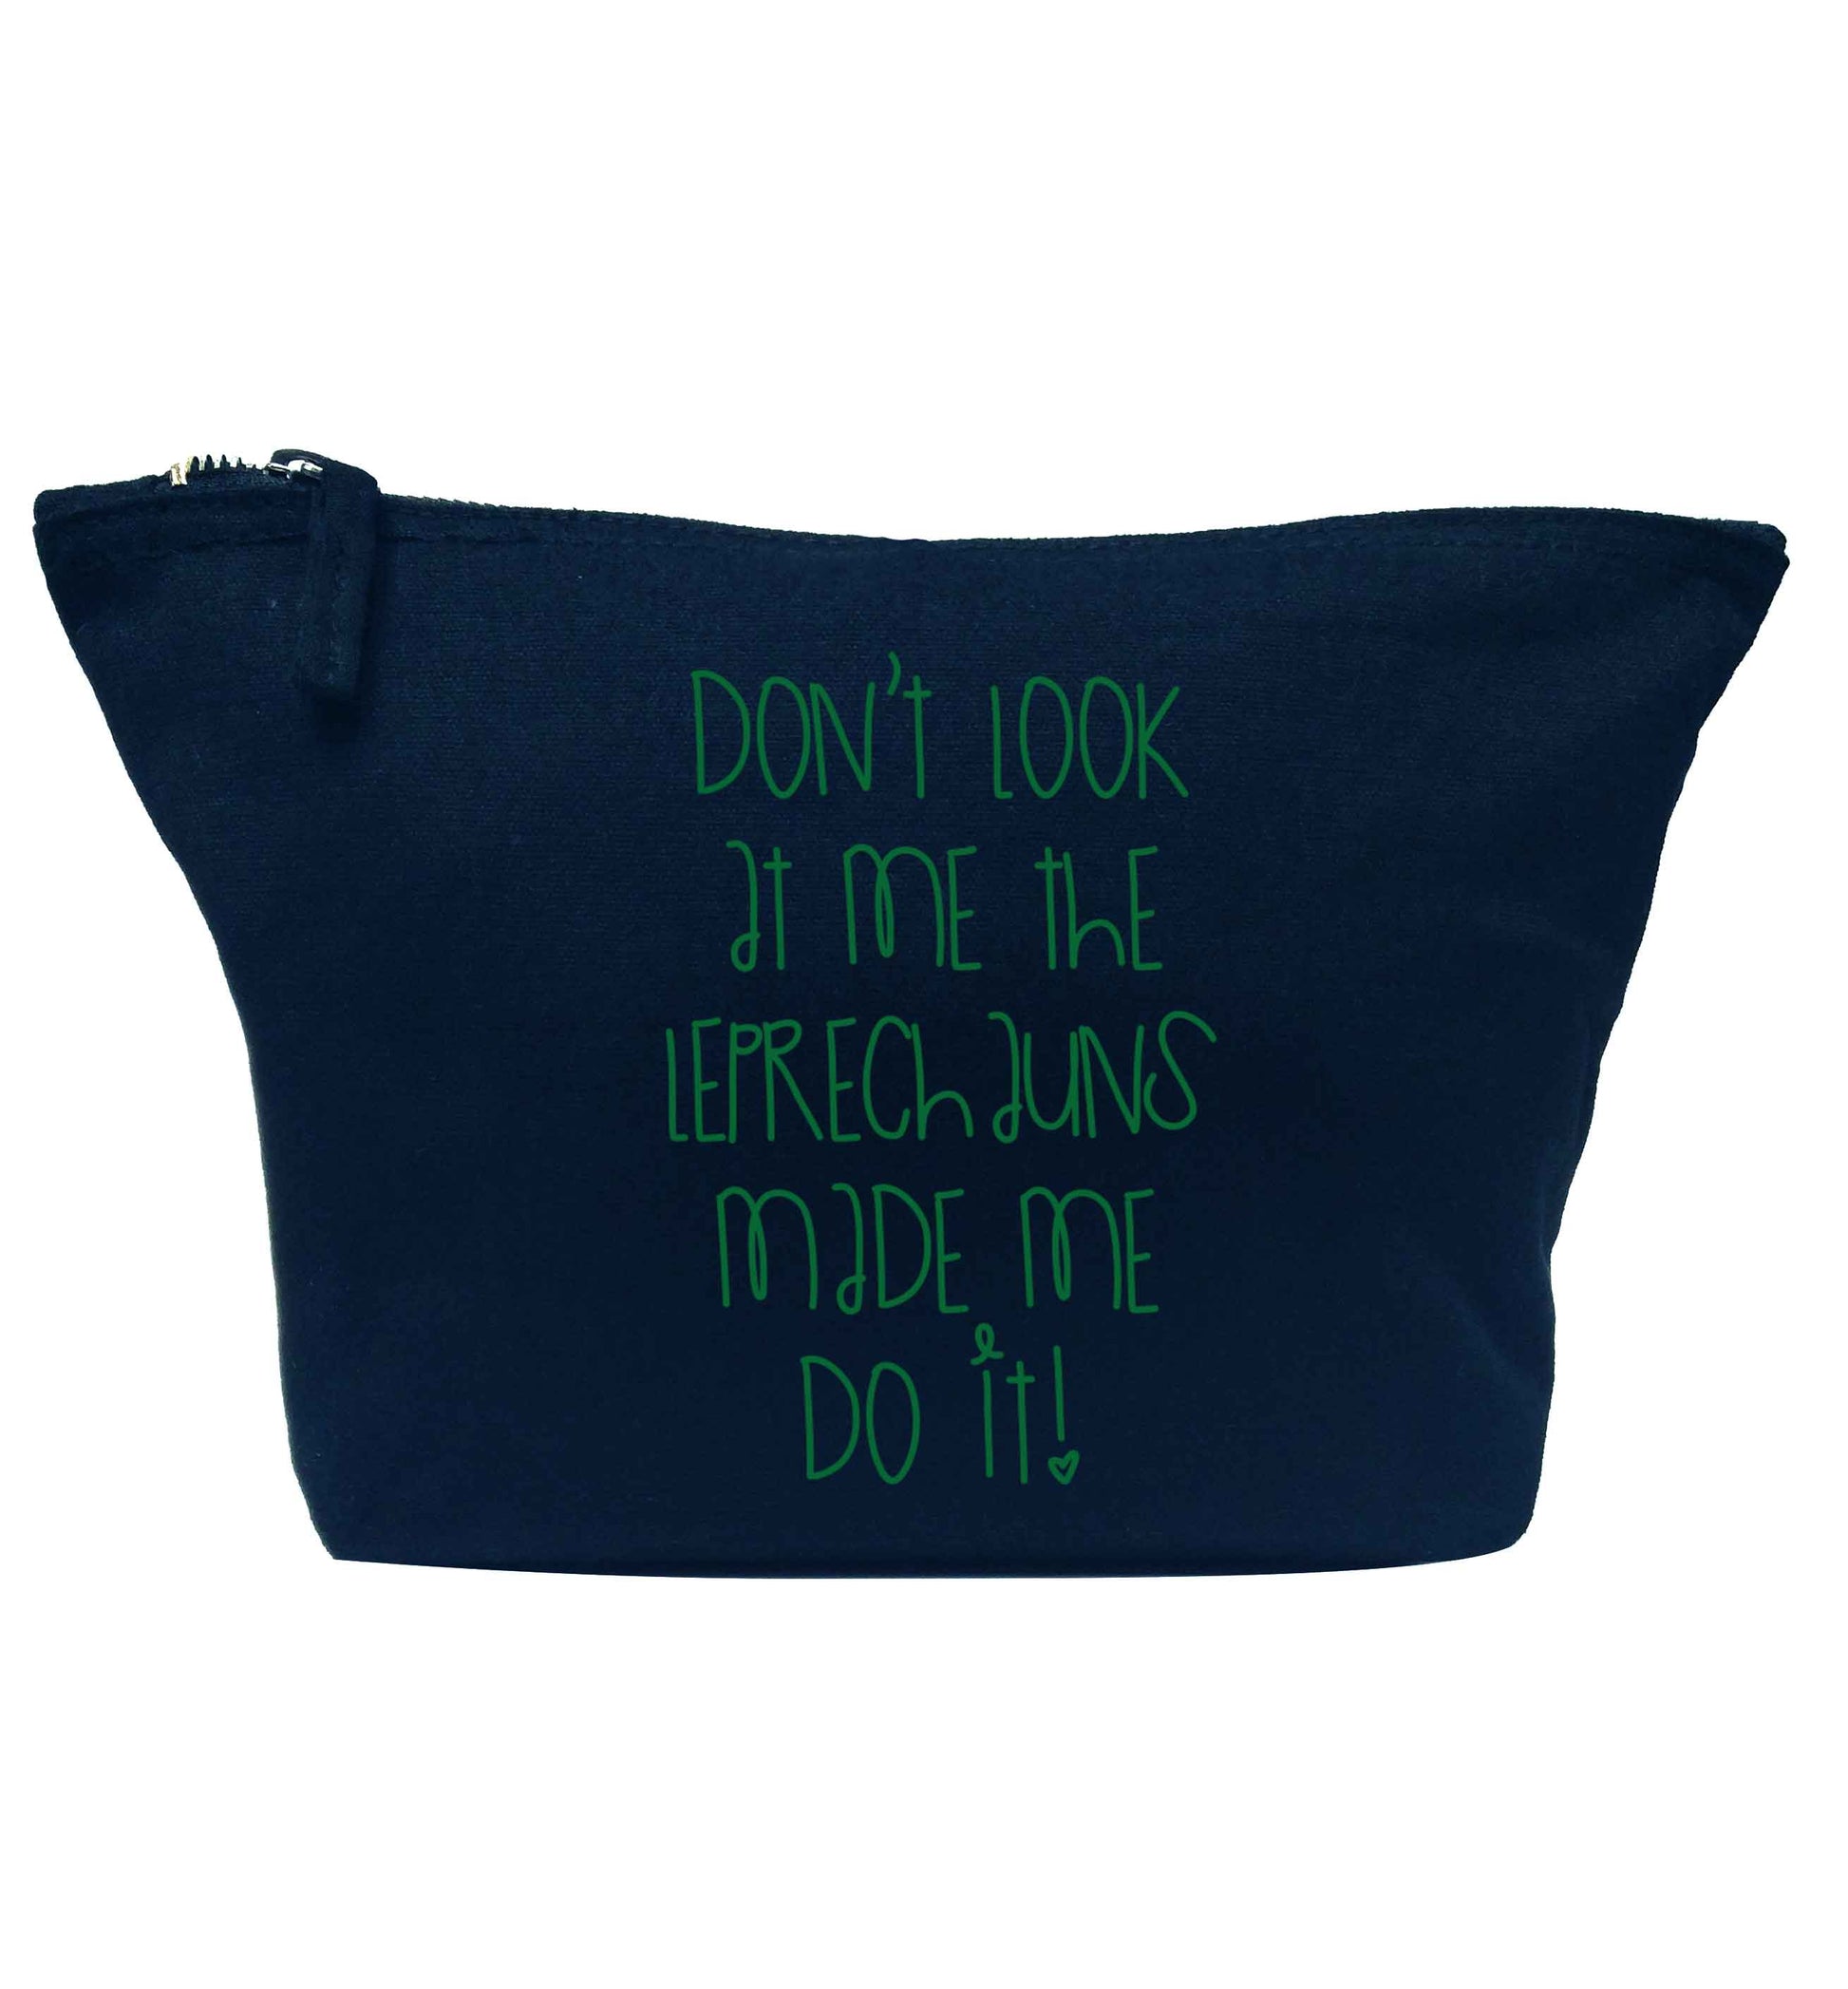 Don't look at me the leprechauns made me do it navy makeup bag